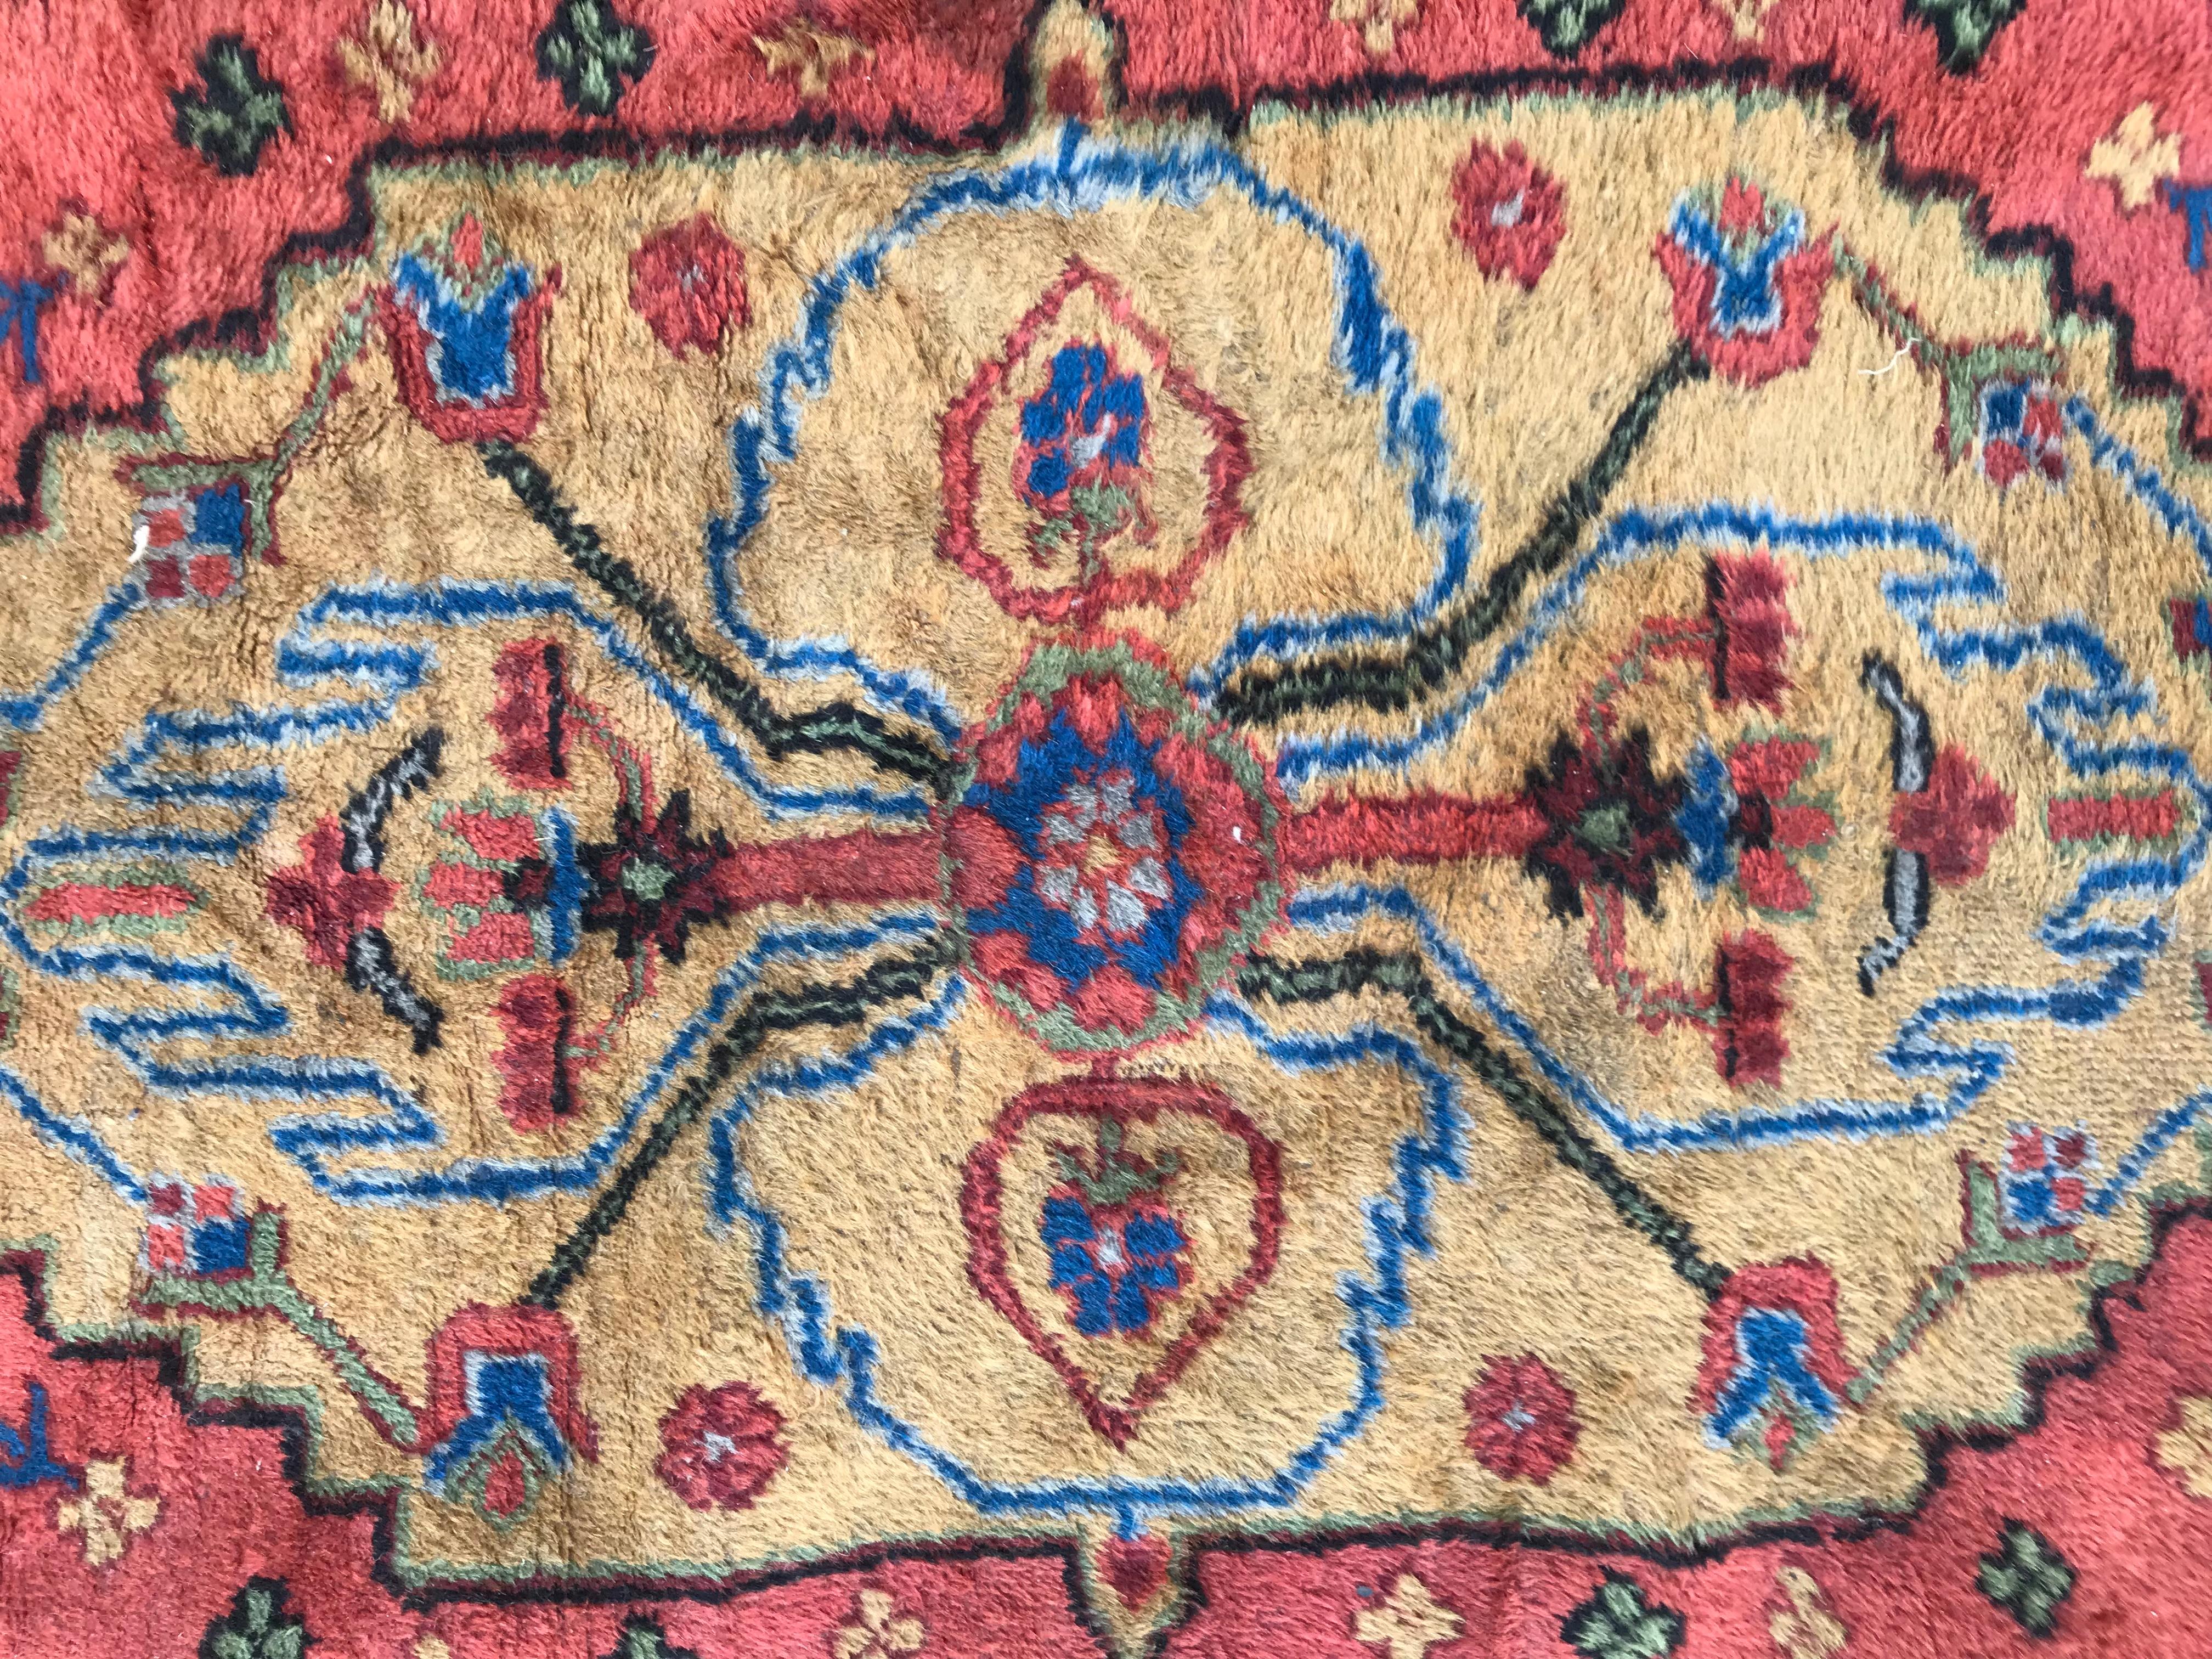 Wool Little Vintage Sinkiang Rug, Antique Persian Style Rugs, 20th Century Carpets